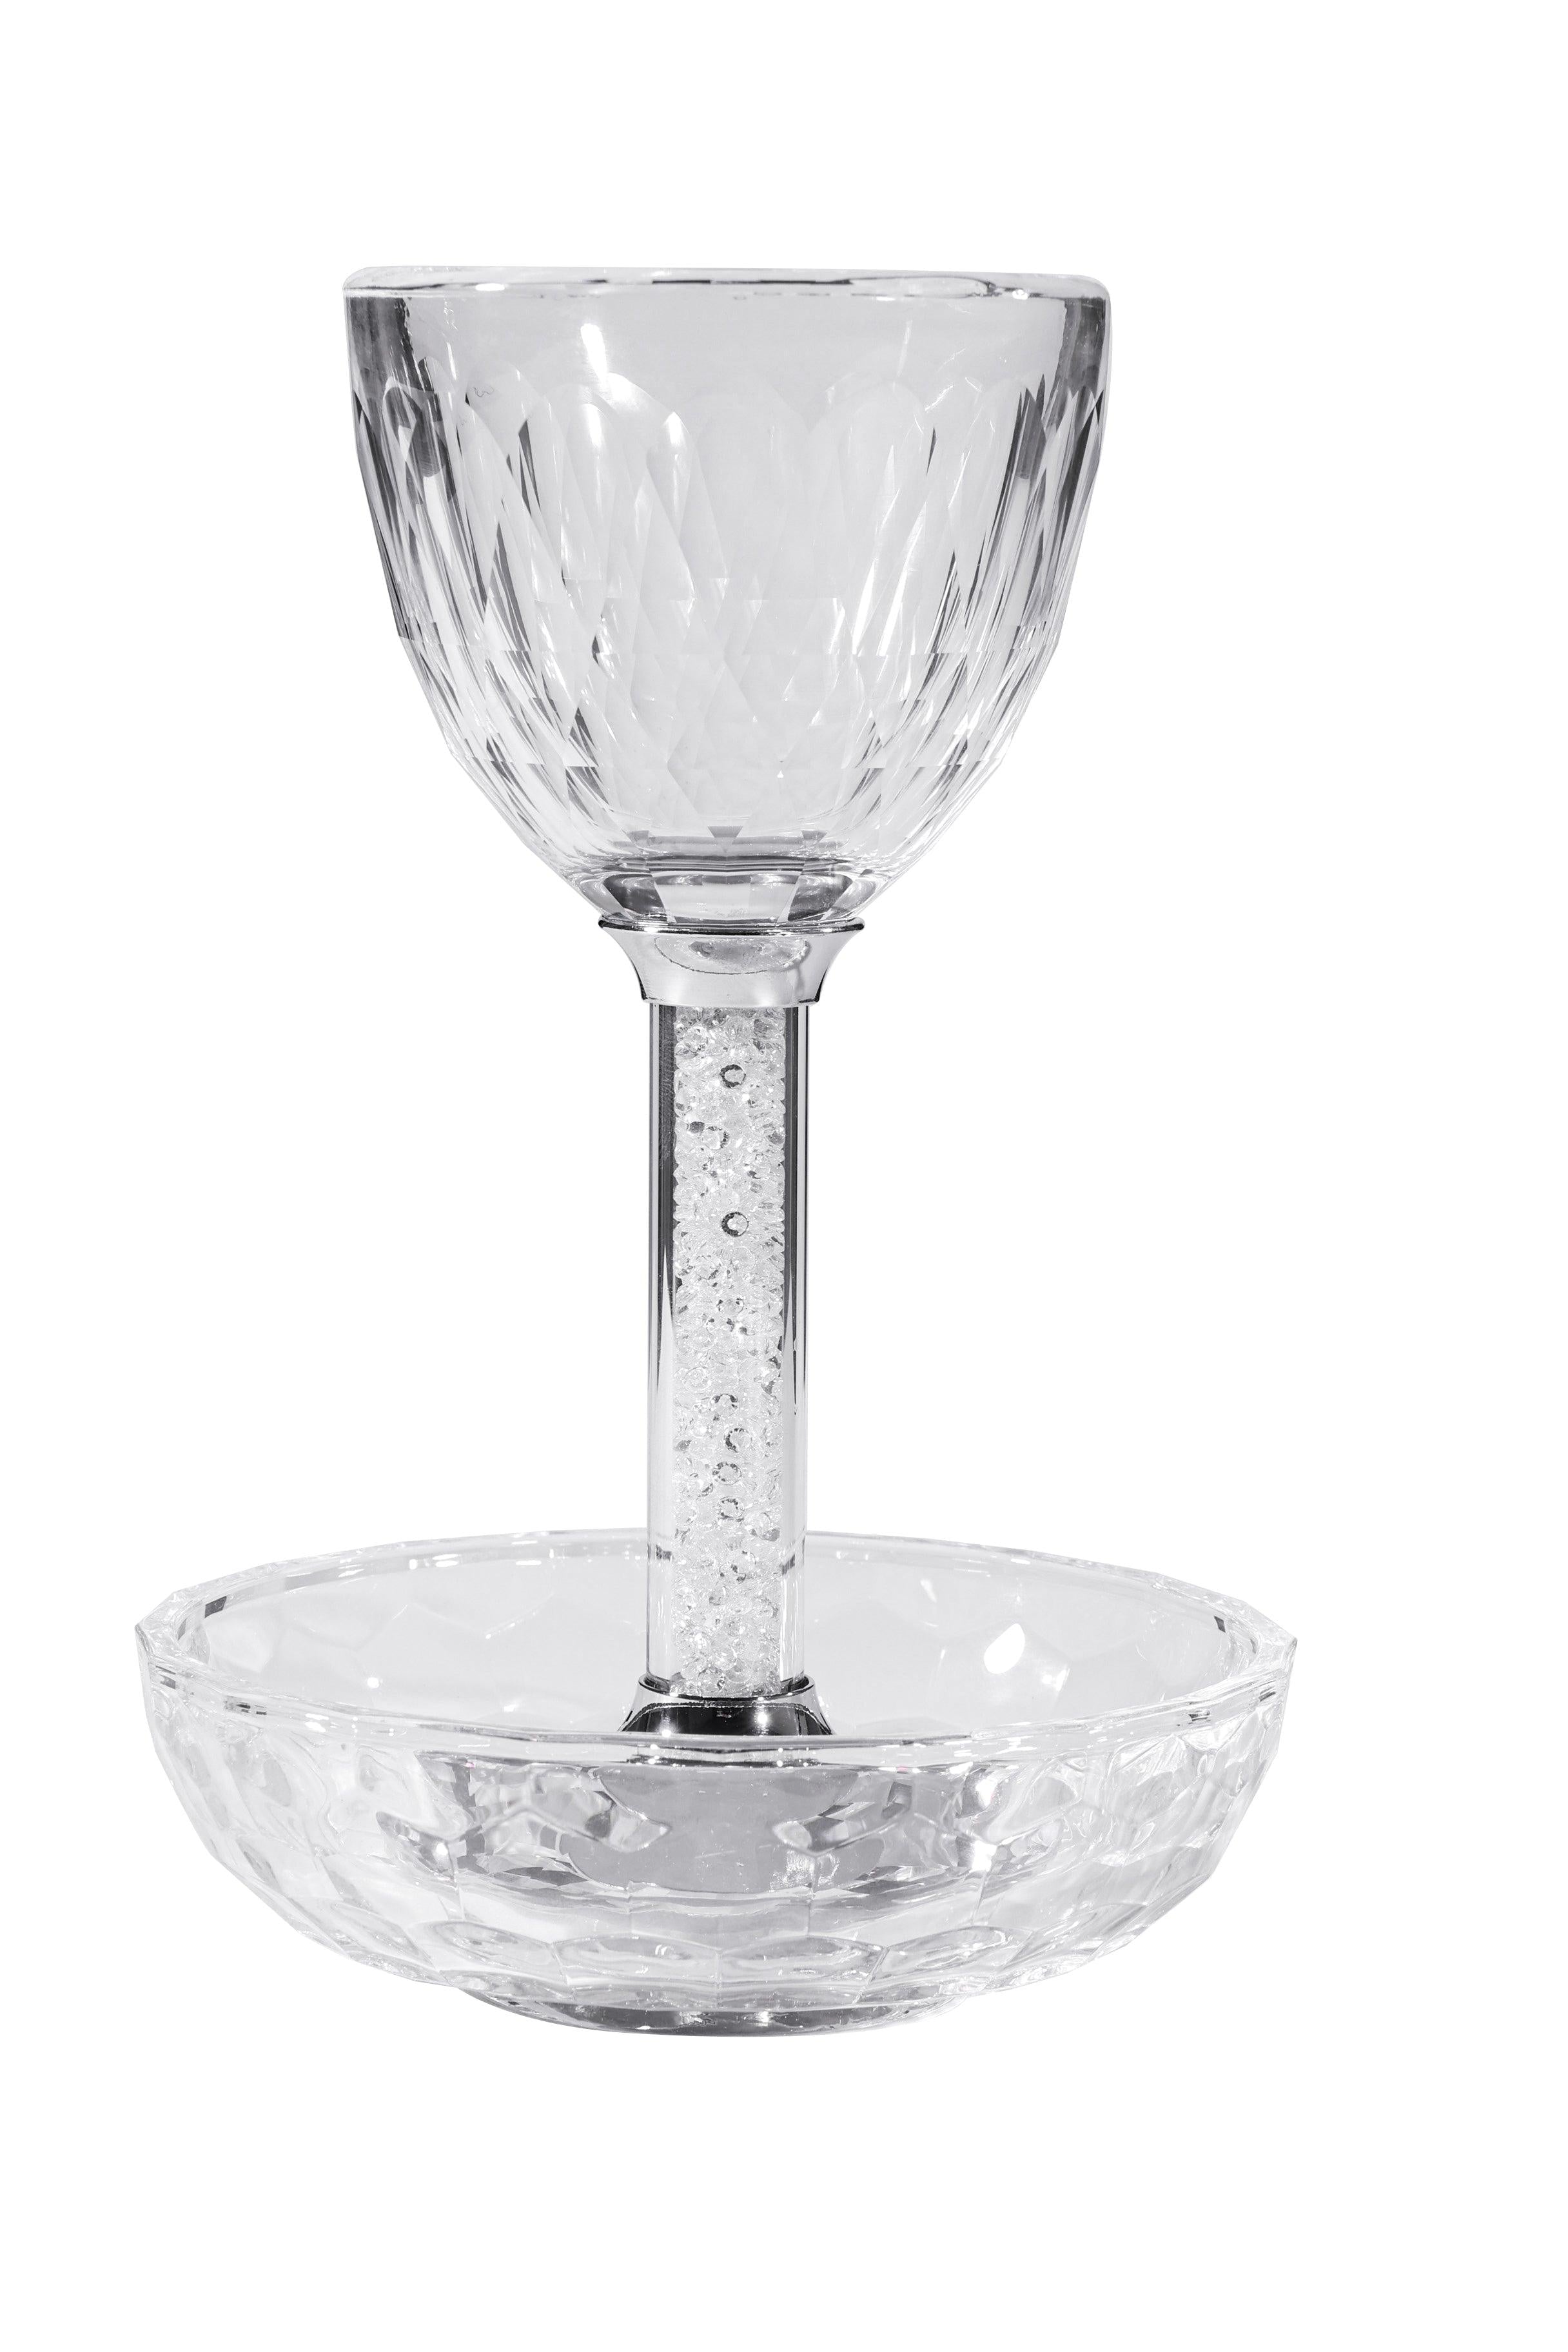 Crystal Glass with Gemstones within the Stem - Elegant Linen